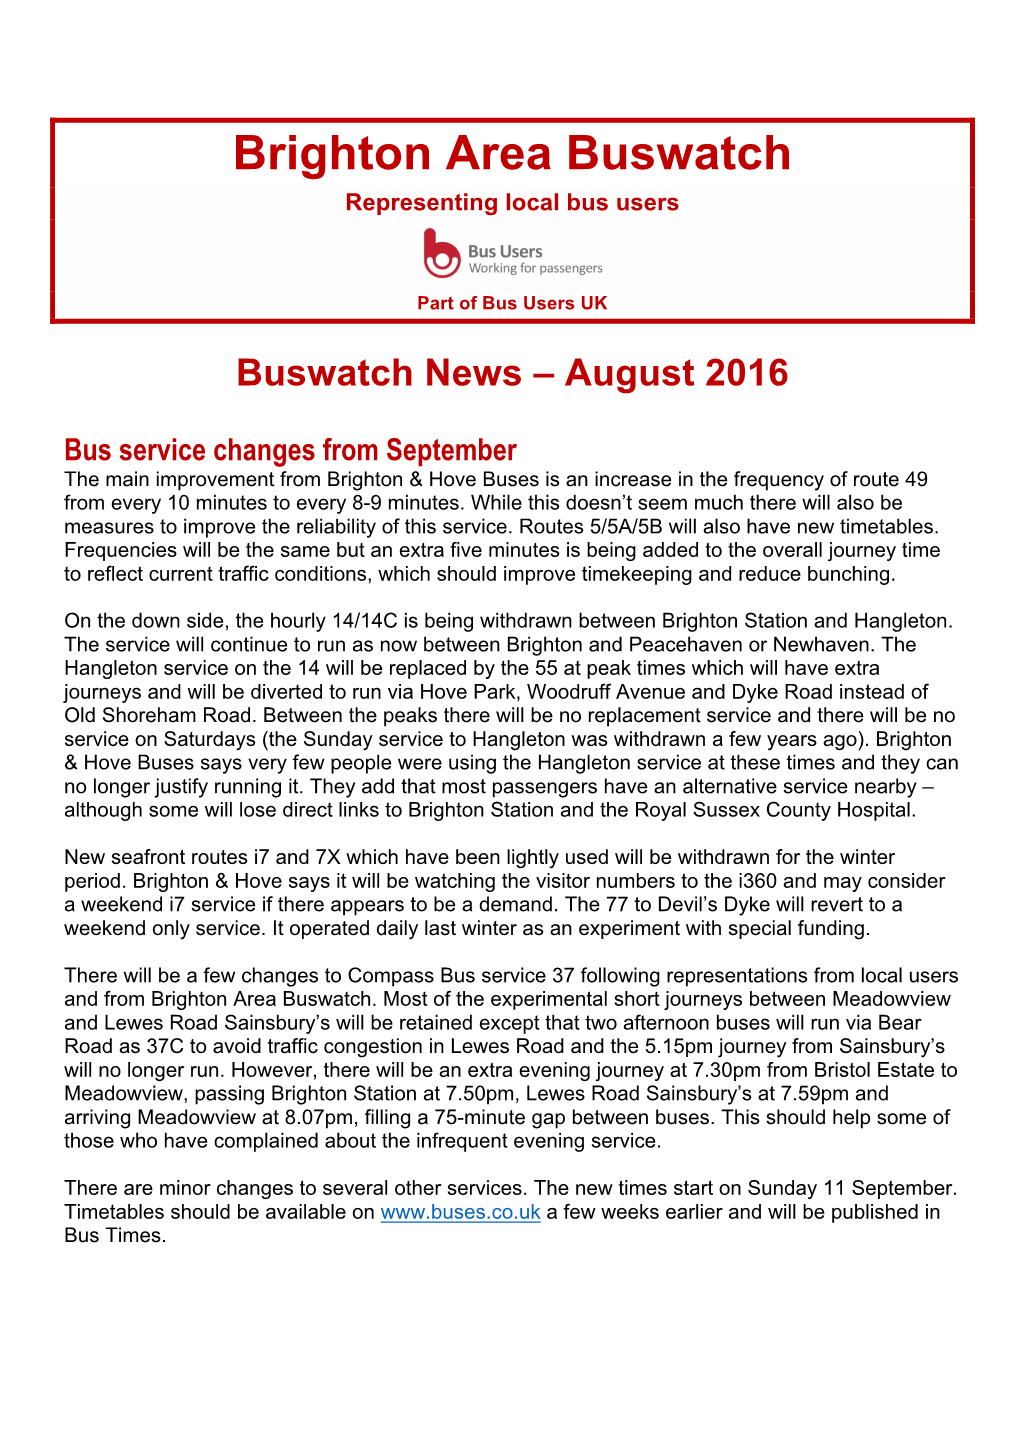 Brighton Area Buswatch Representing Local Bus Users